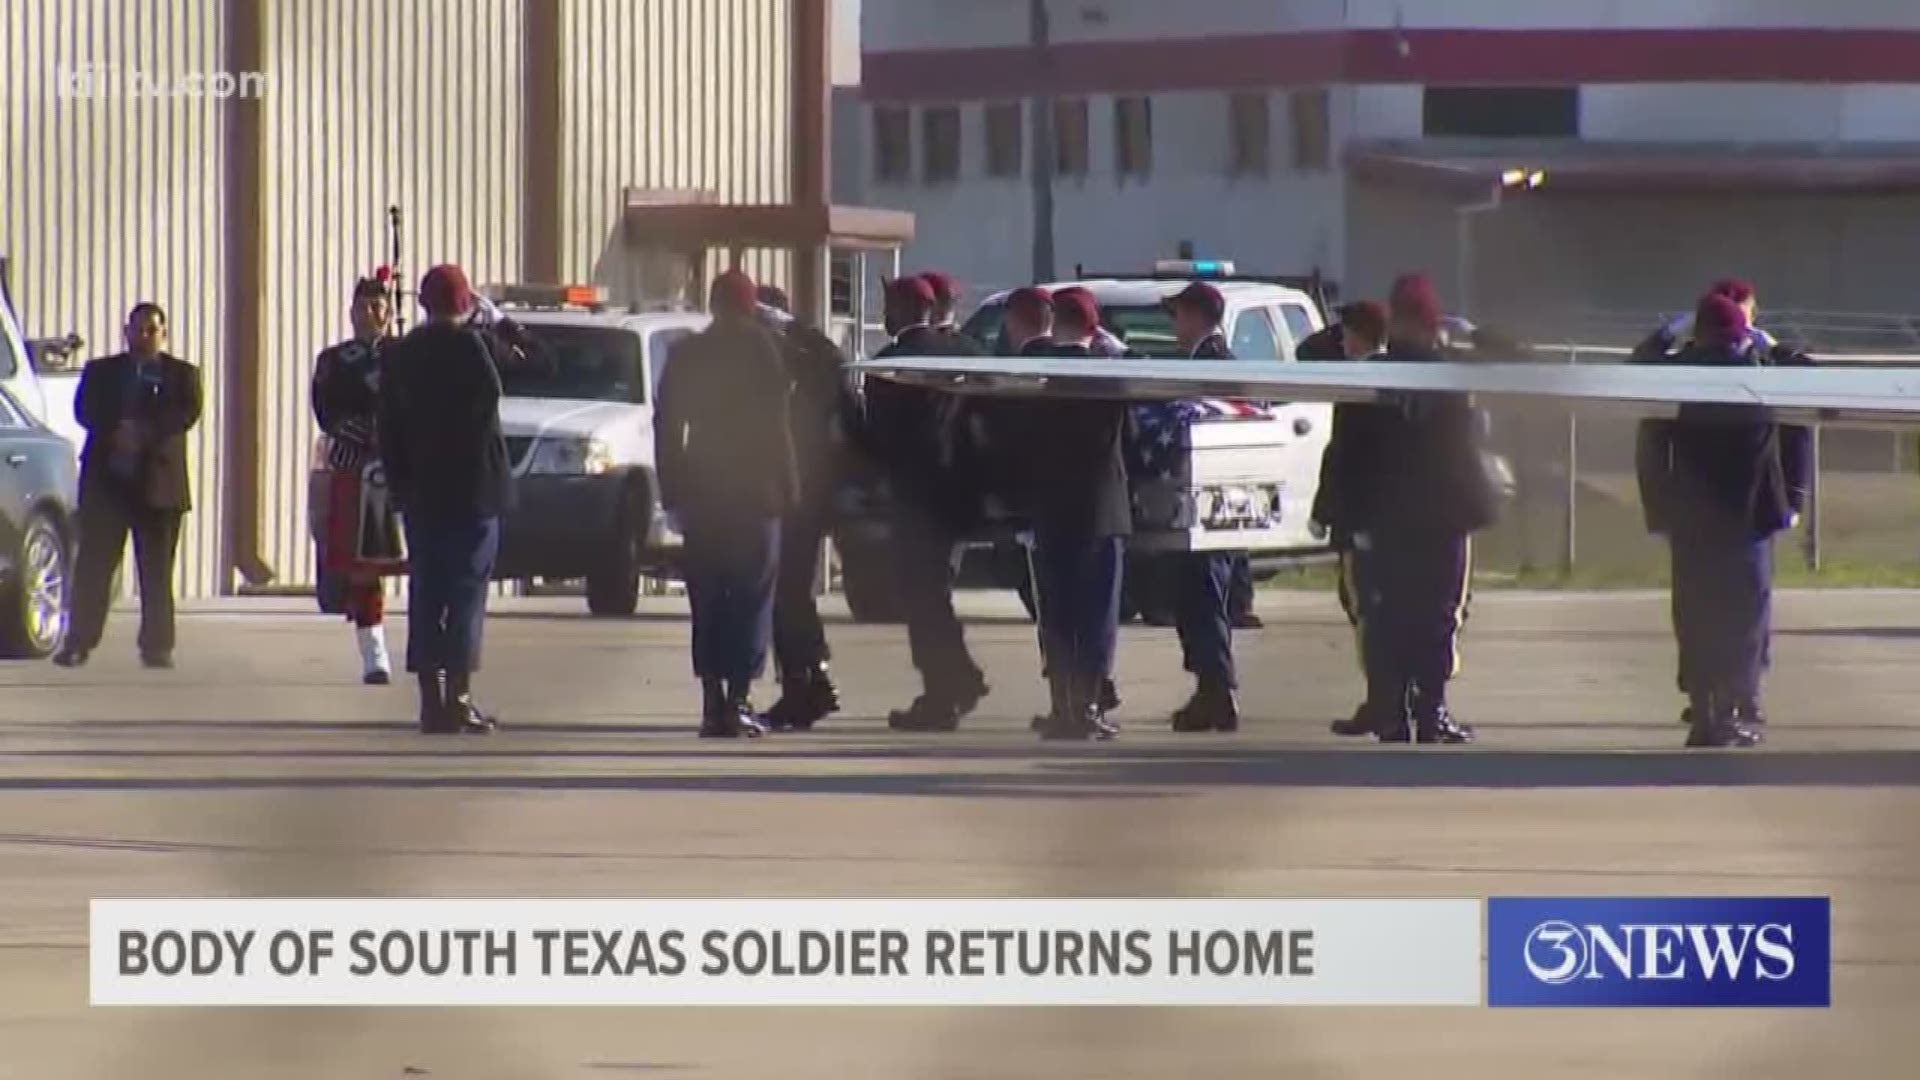 The body of a soldier killed by a roadside bomb in Afghanistan in early January arrived home in South Texas.